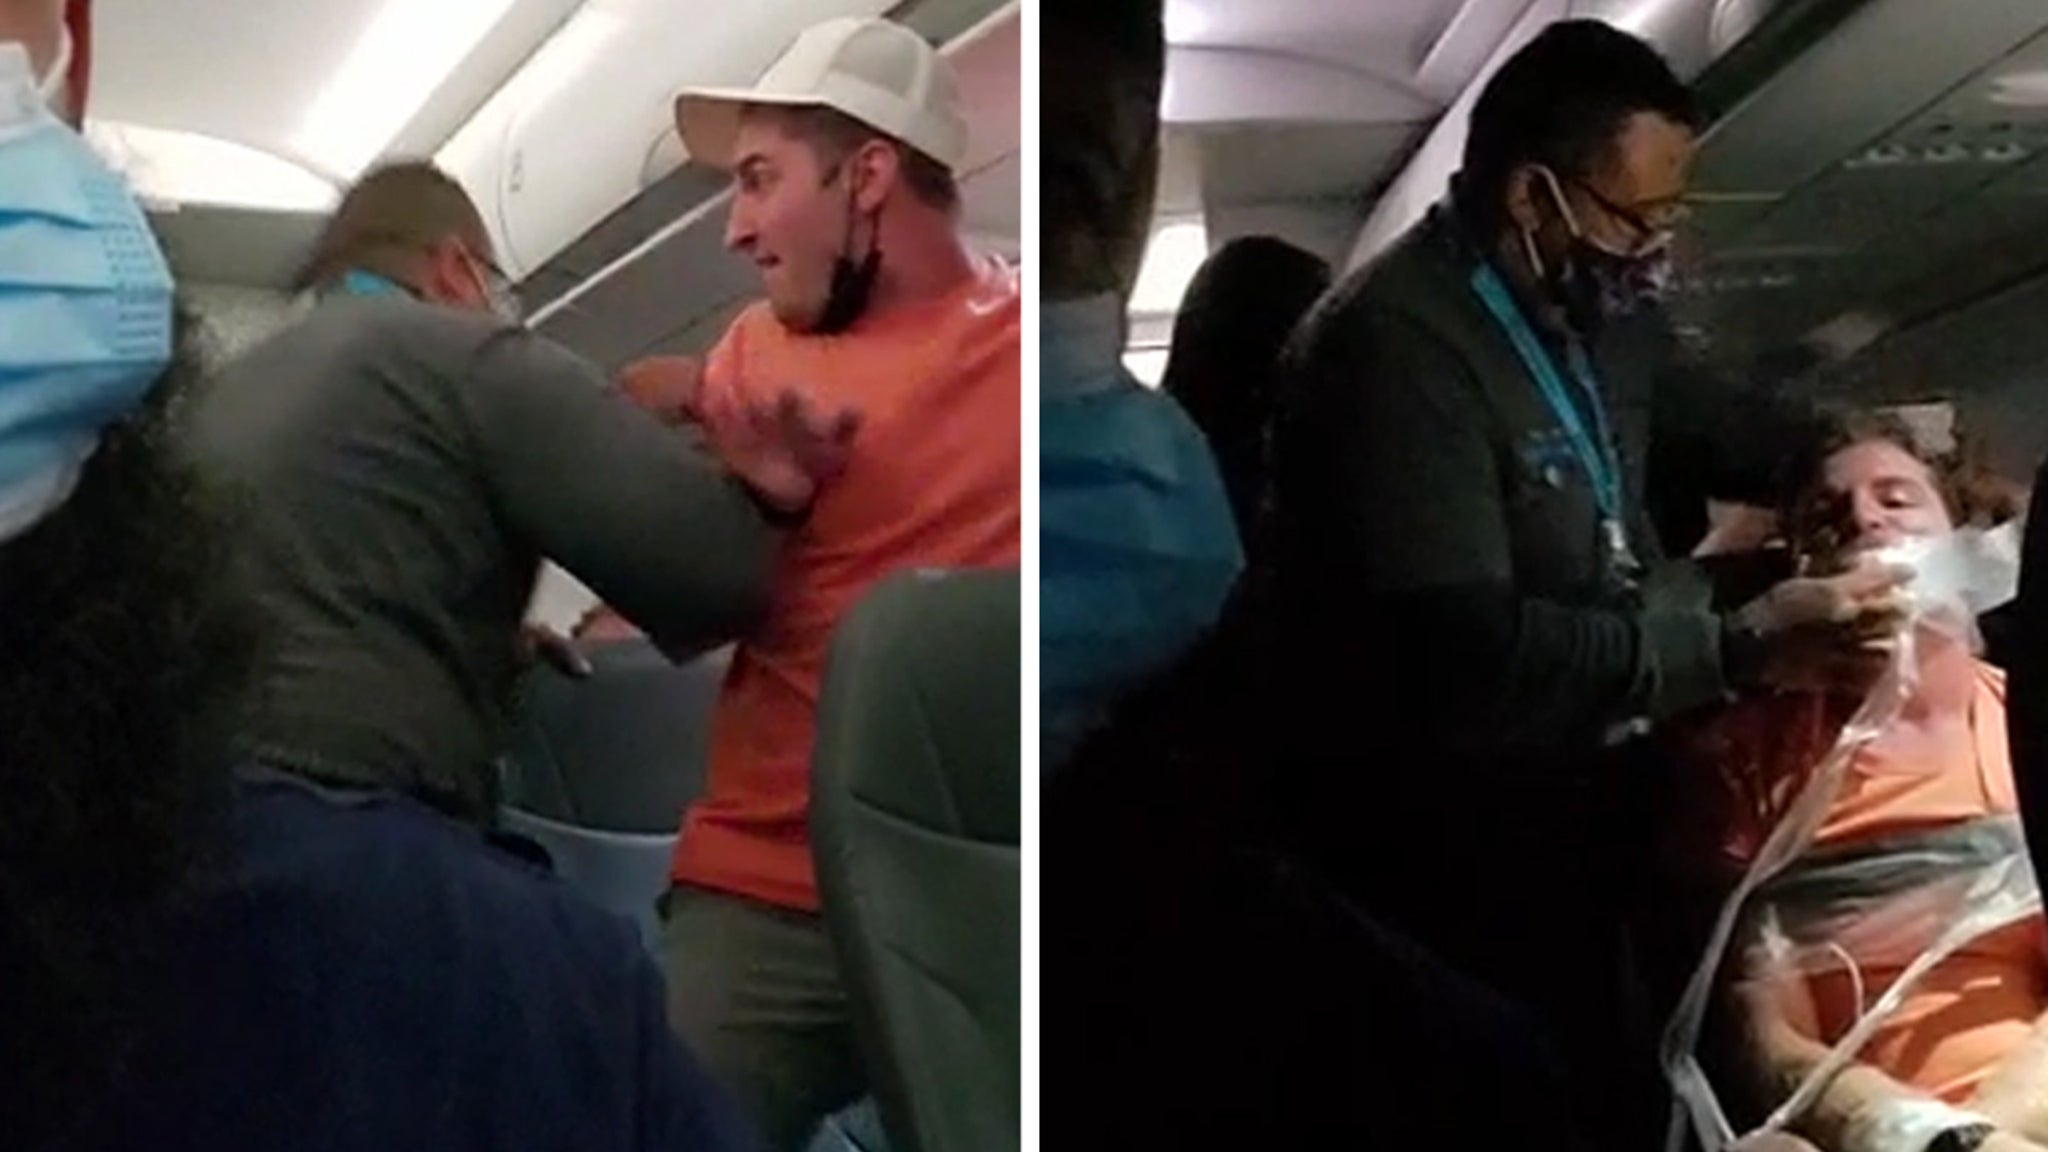 Frontier Passenger Taped to Seat, New Angle Shows More of Wild Rant